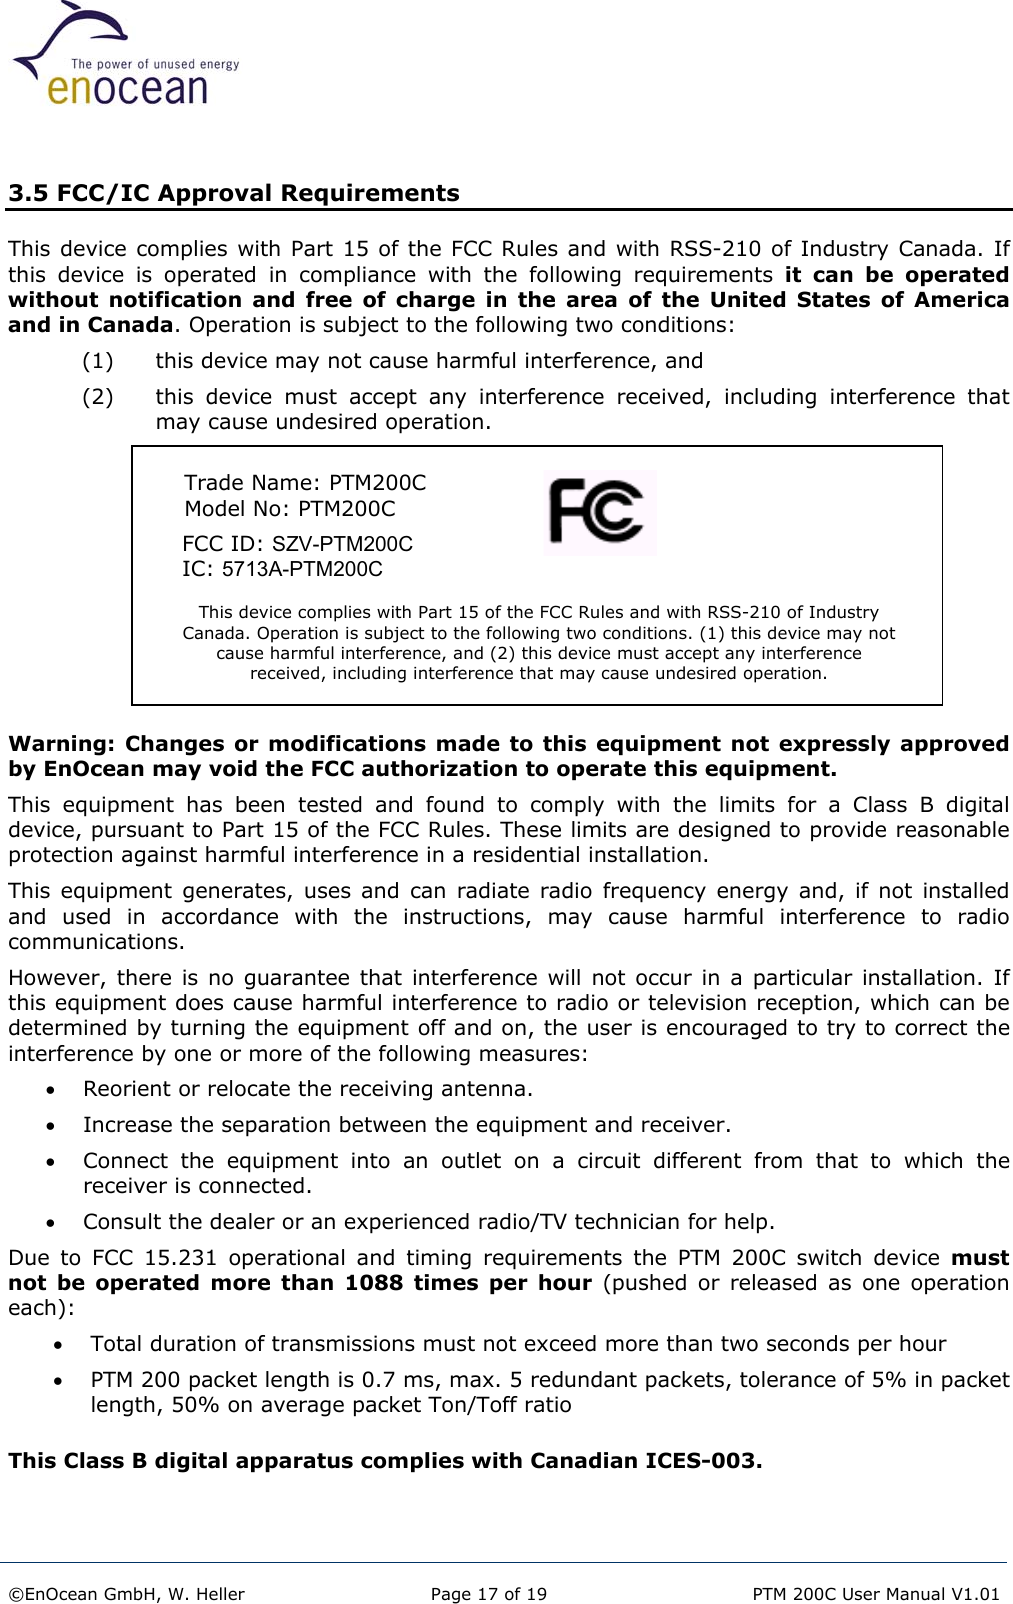   3.5 FCC/IC Approval Requirements This device complies with Part 15 of the FCC Rules and with RSS-210 of Industry Canada. If this device is operated in compliance with the following requirements it can be operated without notification and free of charge in the area of the United States of America and in Canada. Operation is subject to the following two conditions: (1)  this device may not cause harmful interference, and  (2)  this device must accept any interference received, including interference that may cause undesired operation.  This device complies with Part 15 of the FCC Rules and with RSS-210 of Industry Canada. Operation is subject to the following two conditions. (1) this device may notcause harmful interference, and (2) this device must accept any interference received, including interference that may cause undesired operation.      FCC ID: SZV-PTM200C      IC: 5713A-PTM200C  Trade Name: PTM200C Model No: PTM200C        Warning: Changes or modifications made to this equipment not expressly approved by EnOcean may void the FCC authorization to operate this equipment. This equipment has been tested and found to comply with the limits for a Class B digital device, pursuant to Part 15 of the FCC Rules. These limits are designed to provide reasonable protection against harmful interference in a residential installation.  This equipment generates, uses and can radiate radio frequency energy and, if not installed and used in accordance with the instructions, may cause harmful interference to radio communications.   However, there is no guarantee that interference will not occur in a particular installation. If this equipment does cause harmful interference to radio or television reception, which can be determined by turning the equipment off and on, the user is encouraged to try to correct the interference by one or more of the following measures: •  Reorient or relocate the receiving antenna. •  Increase the separation between the equipment and receiver. •  Connect the equipment into an outlet on a circuit different from that to which the receiver is connected. •  Consult the dealer or an experienced radio/TV technician for help. Due to FCC 15.231 operational and timing requirements the PTM 200C switch device must not be operated more than 1088 times per hour (pushed or released as one operation each): •  Total duration of transmissions must not exceed more than two seconds per hour •  PTM 200 packet length is 0.7 ms, max. 5 redundant packets, tolerance of 5% in packet length, 50% on average packet Ton/Toff ratio  This Class B digital apparatus complies with Canadian ICES-003. ©EnOcean GmbH, W. Heller  Page 17 of 19   PTM 200C User Manual V1.01  